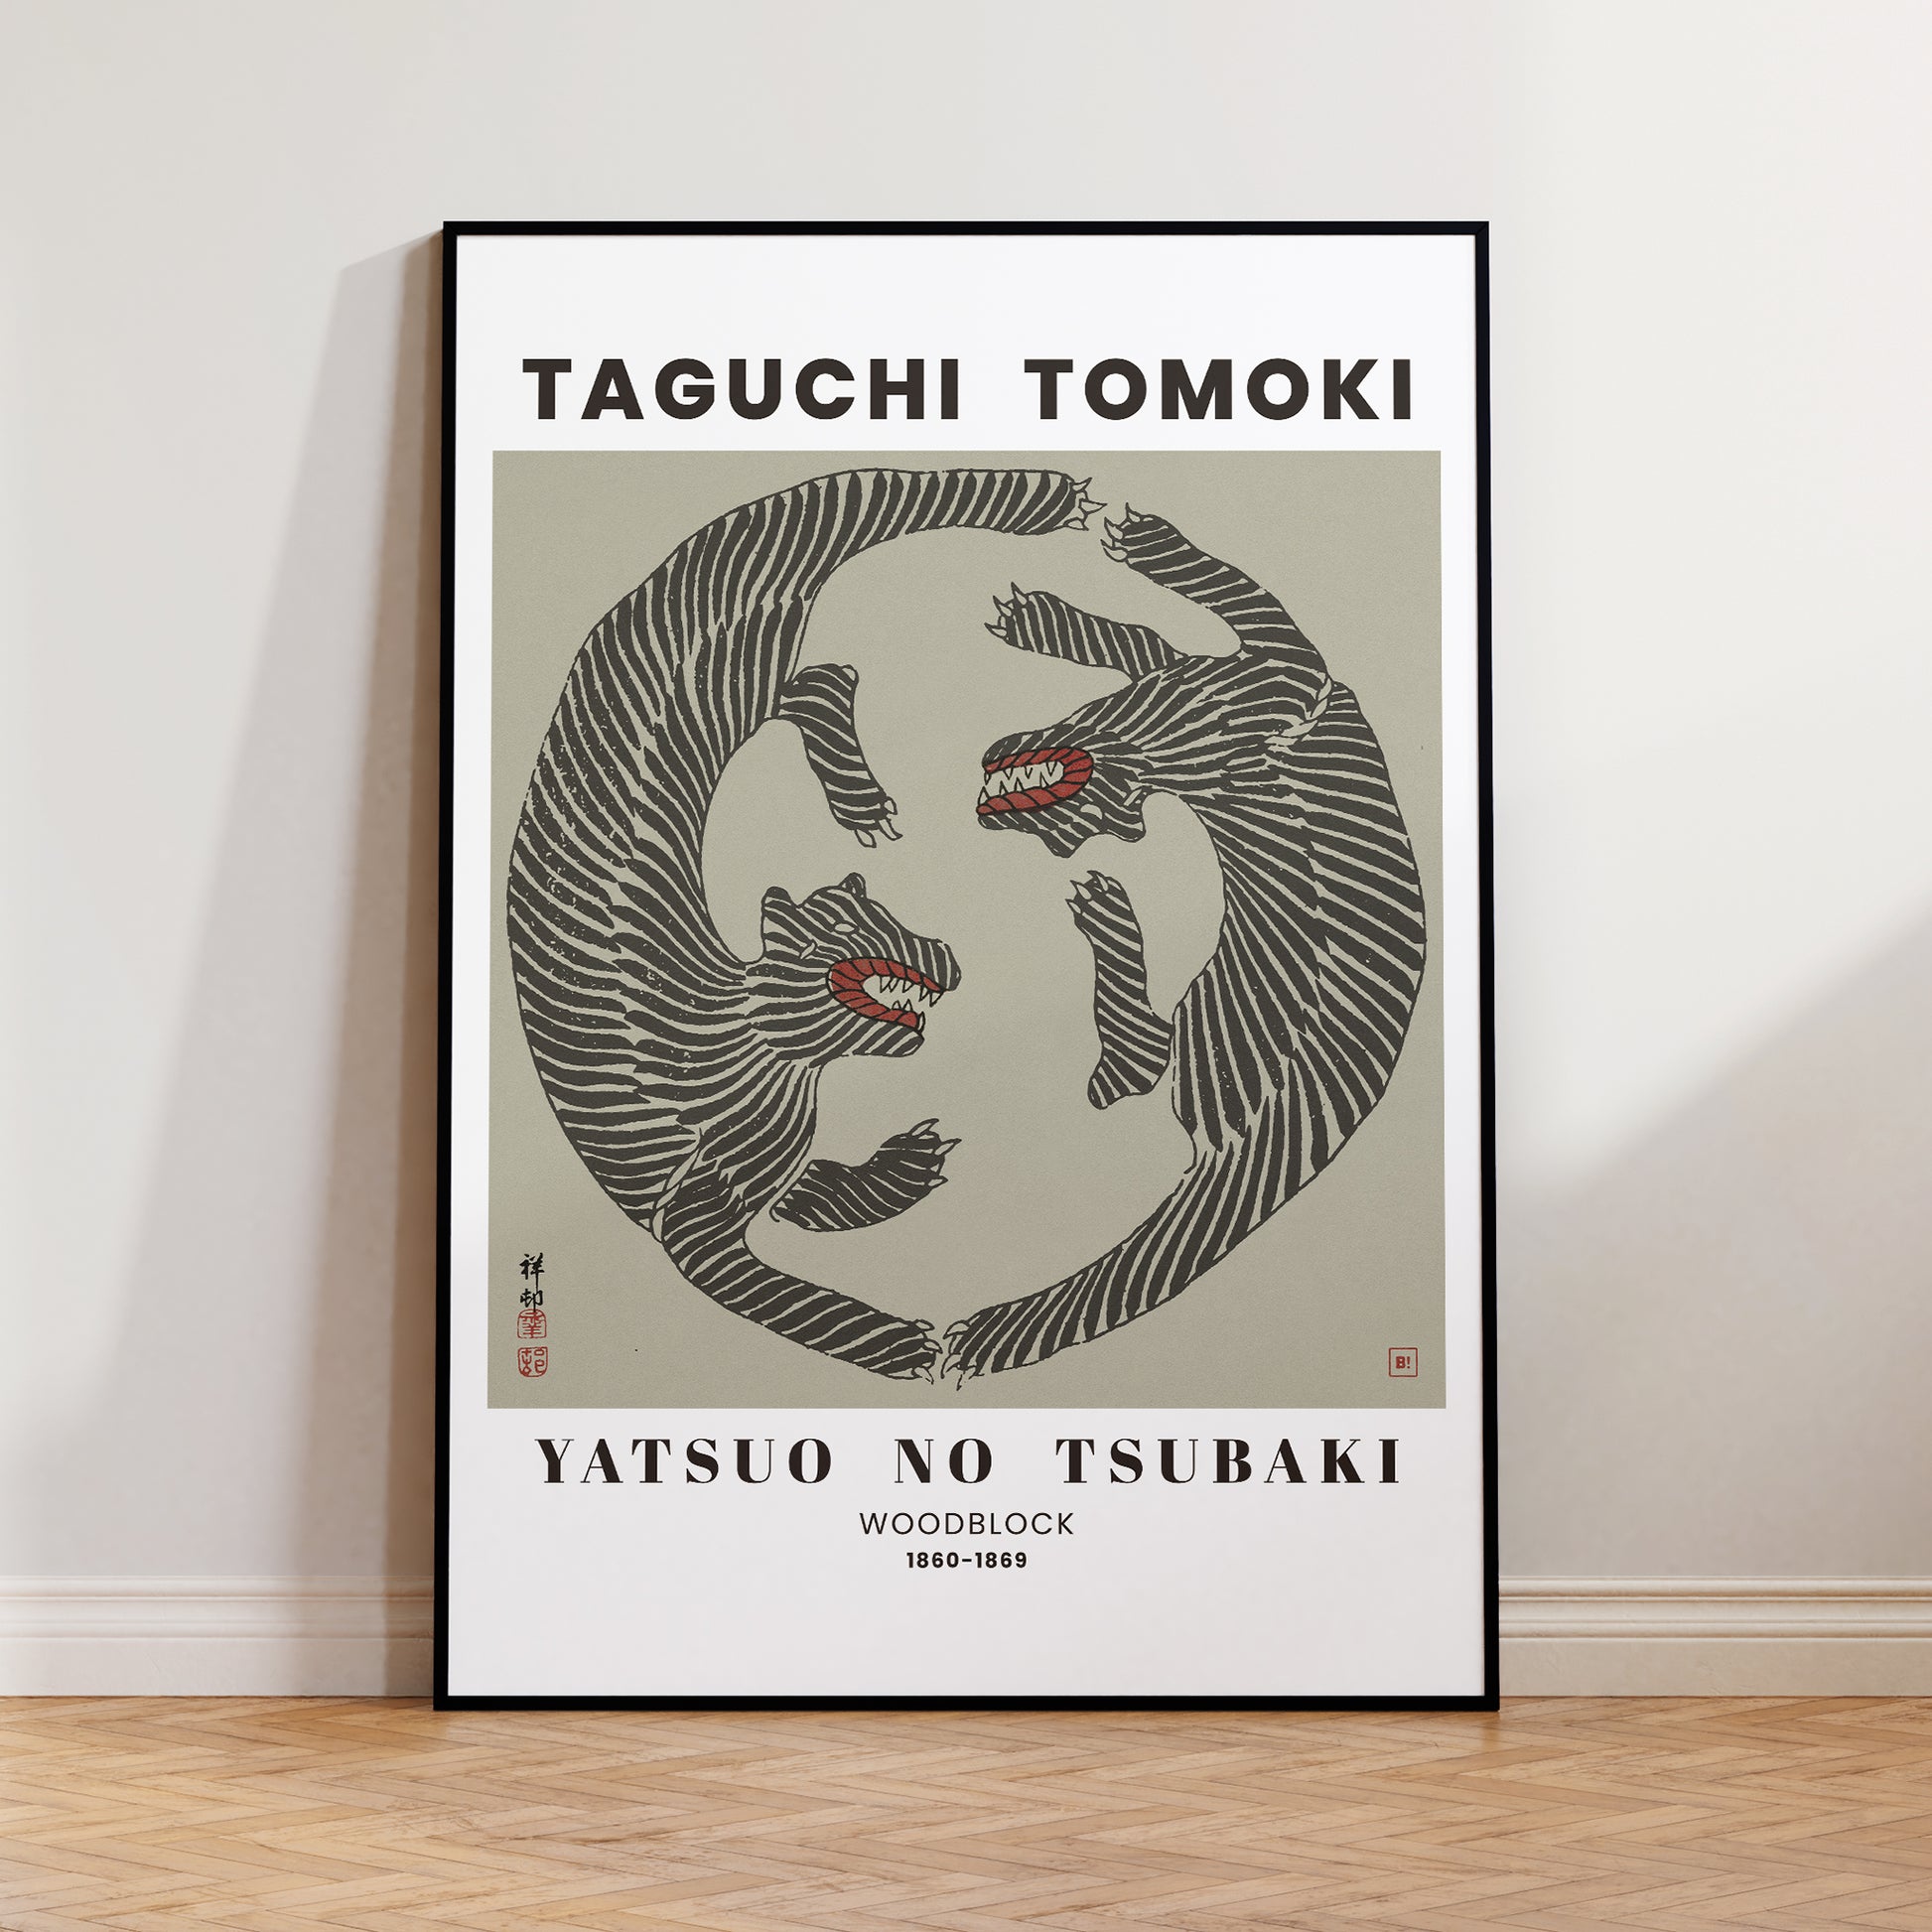 Be inspired by our remastered Taguchi Tomoki Woodblock Tigers Sage Green exhibition art print. This artwork was printed using the giclée process on archival acid-free paper and is presented in a modern black frame that captures its timeless beauty in every detail.